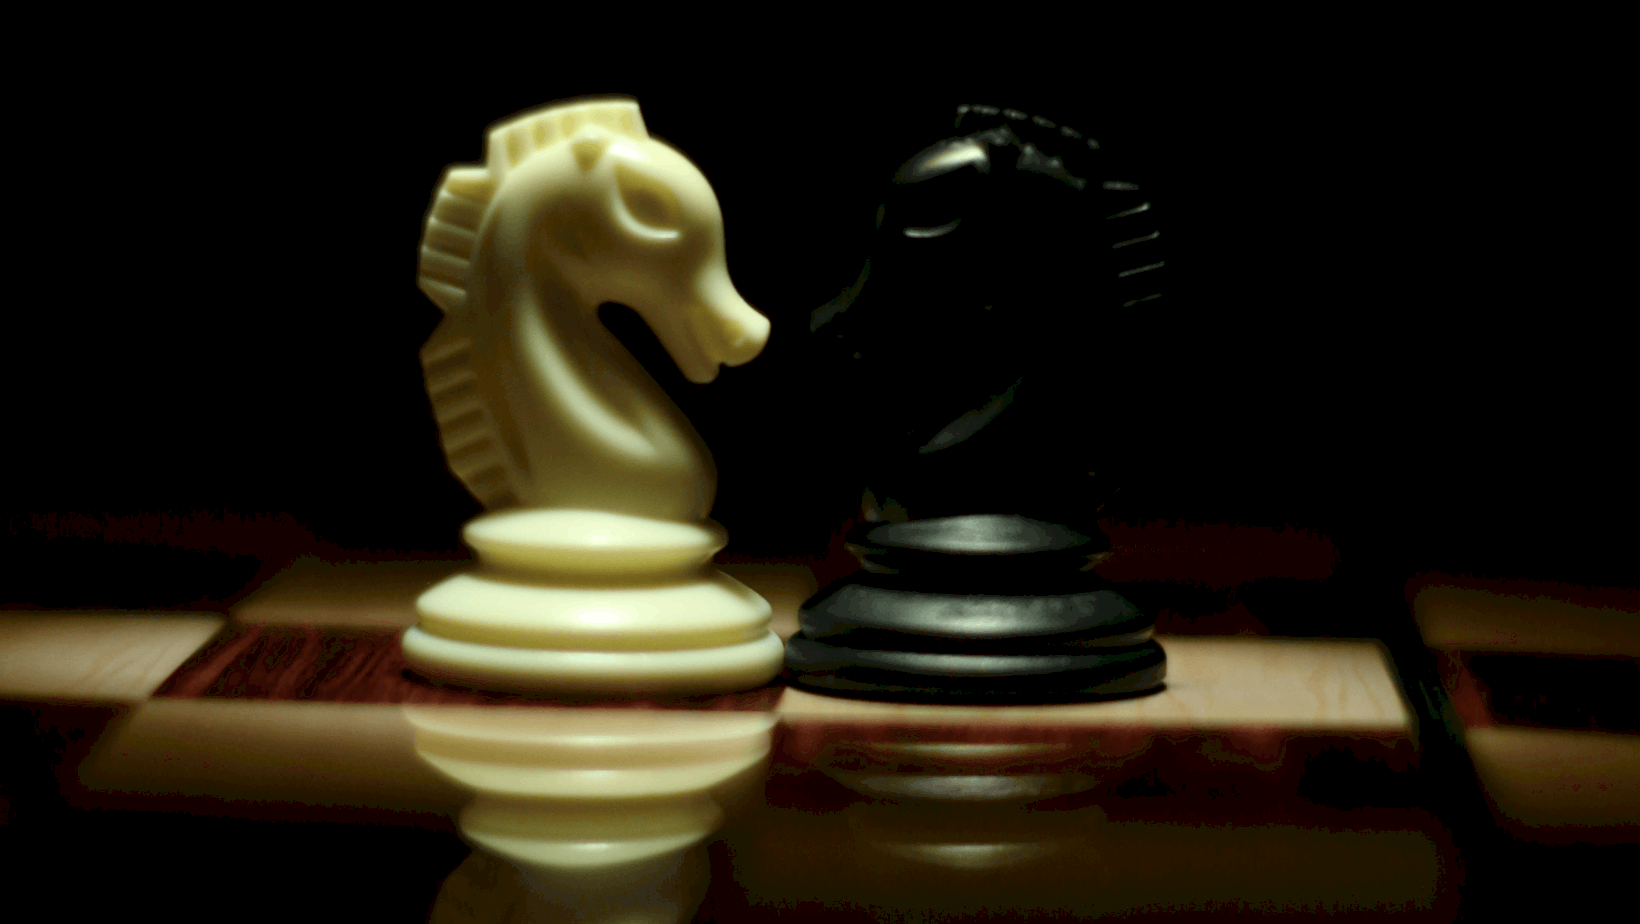 chess knights as metaphor for e-commerce competition